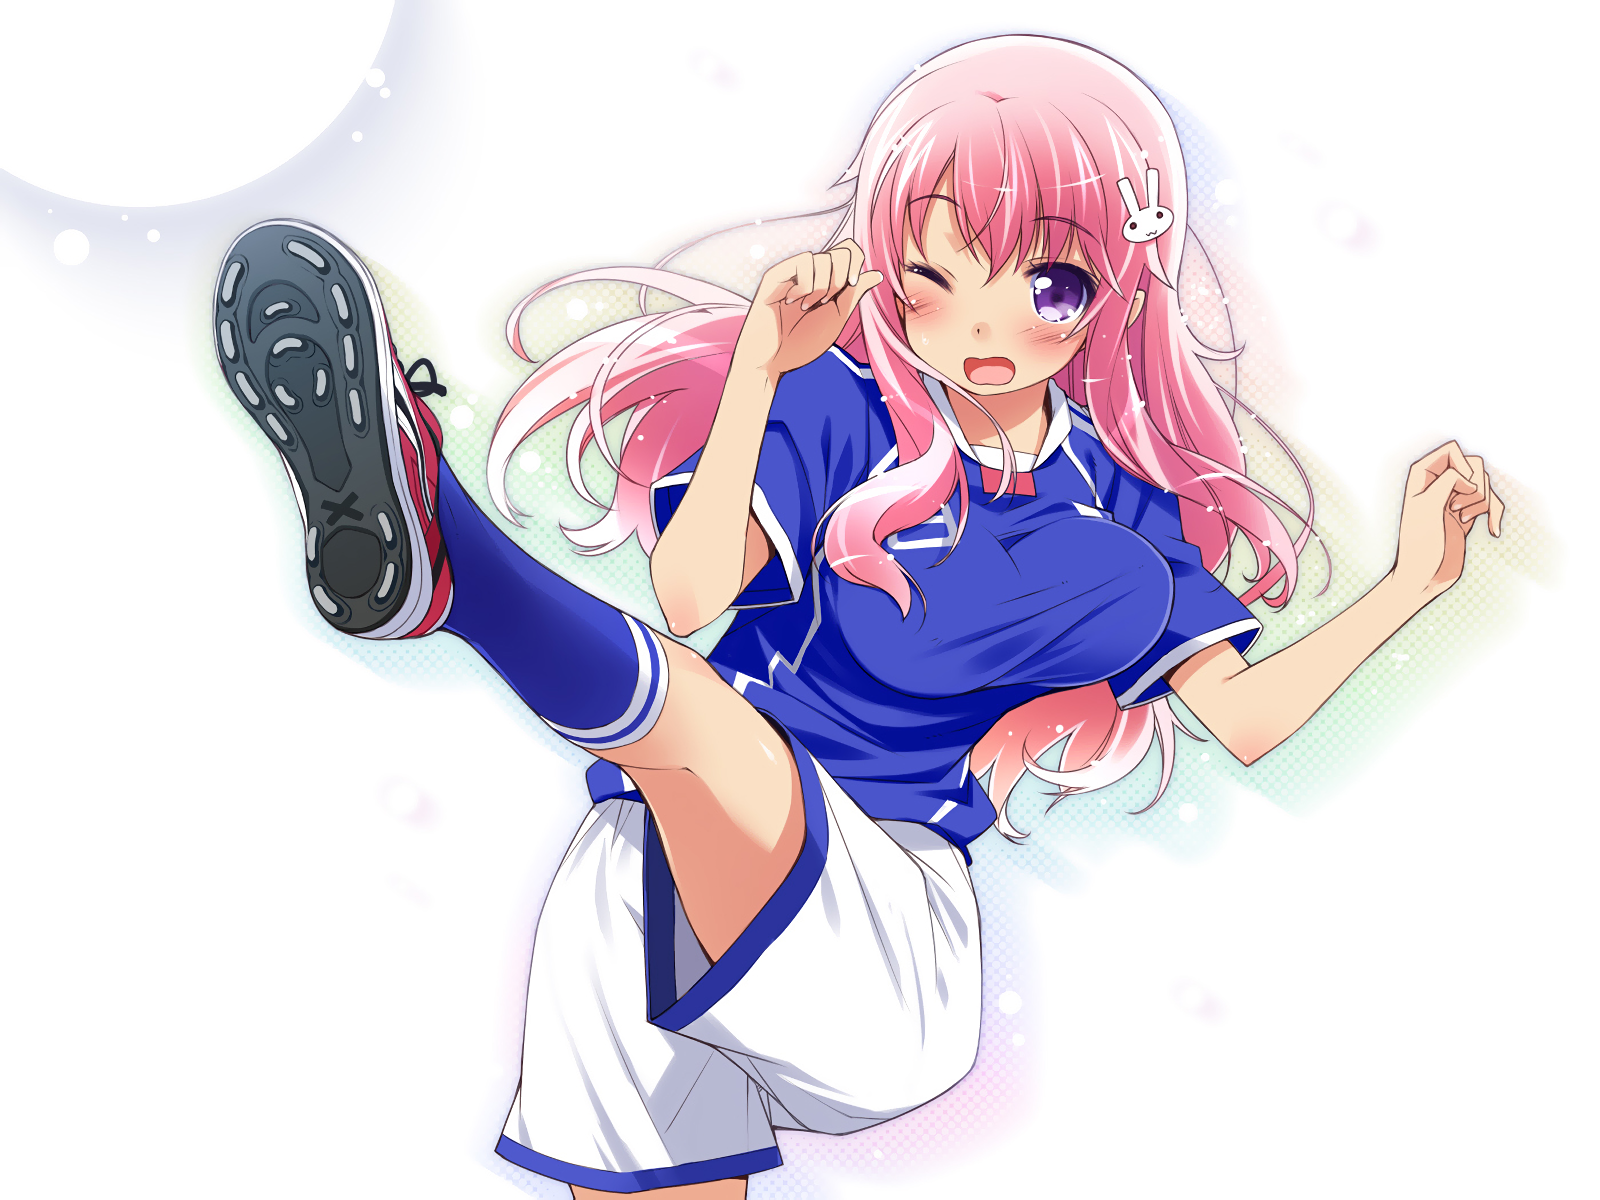 Baka And Test Wallpaper Background Image 1600x1200 ID753944.